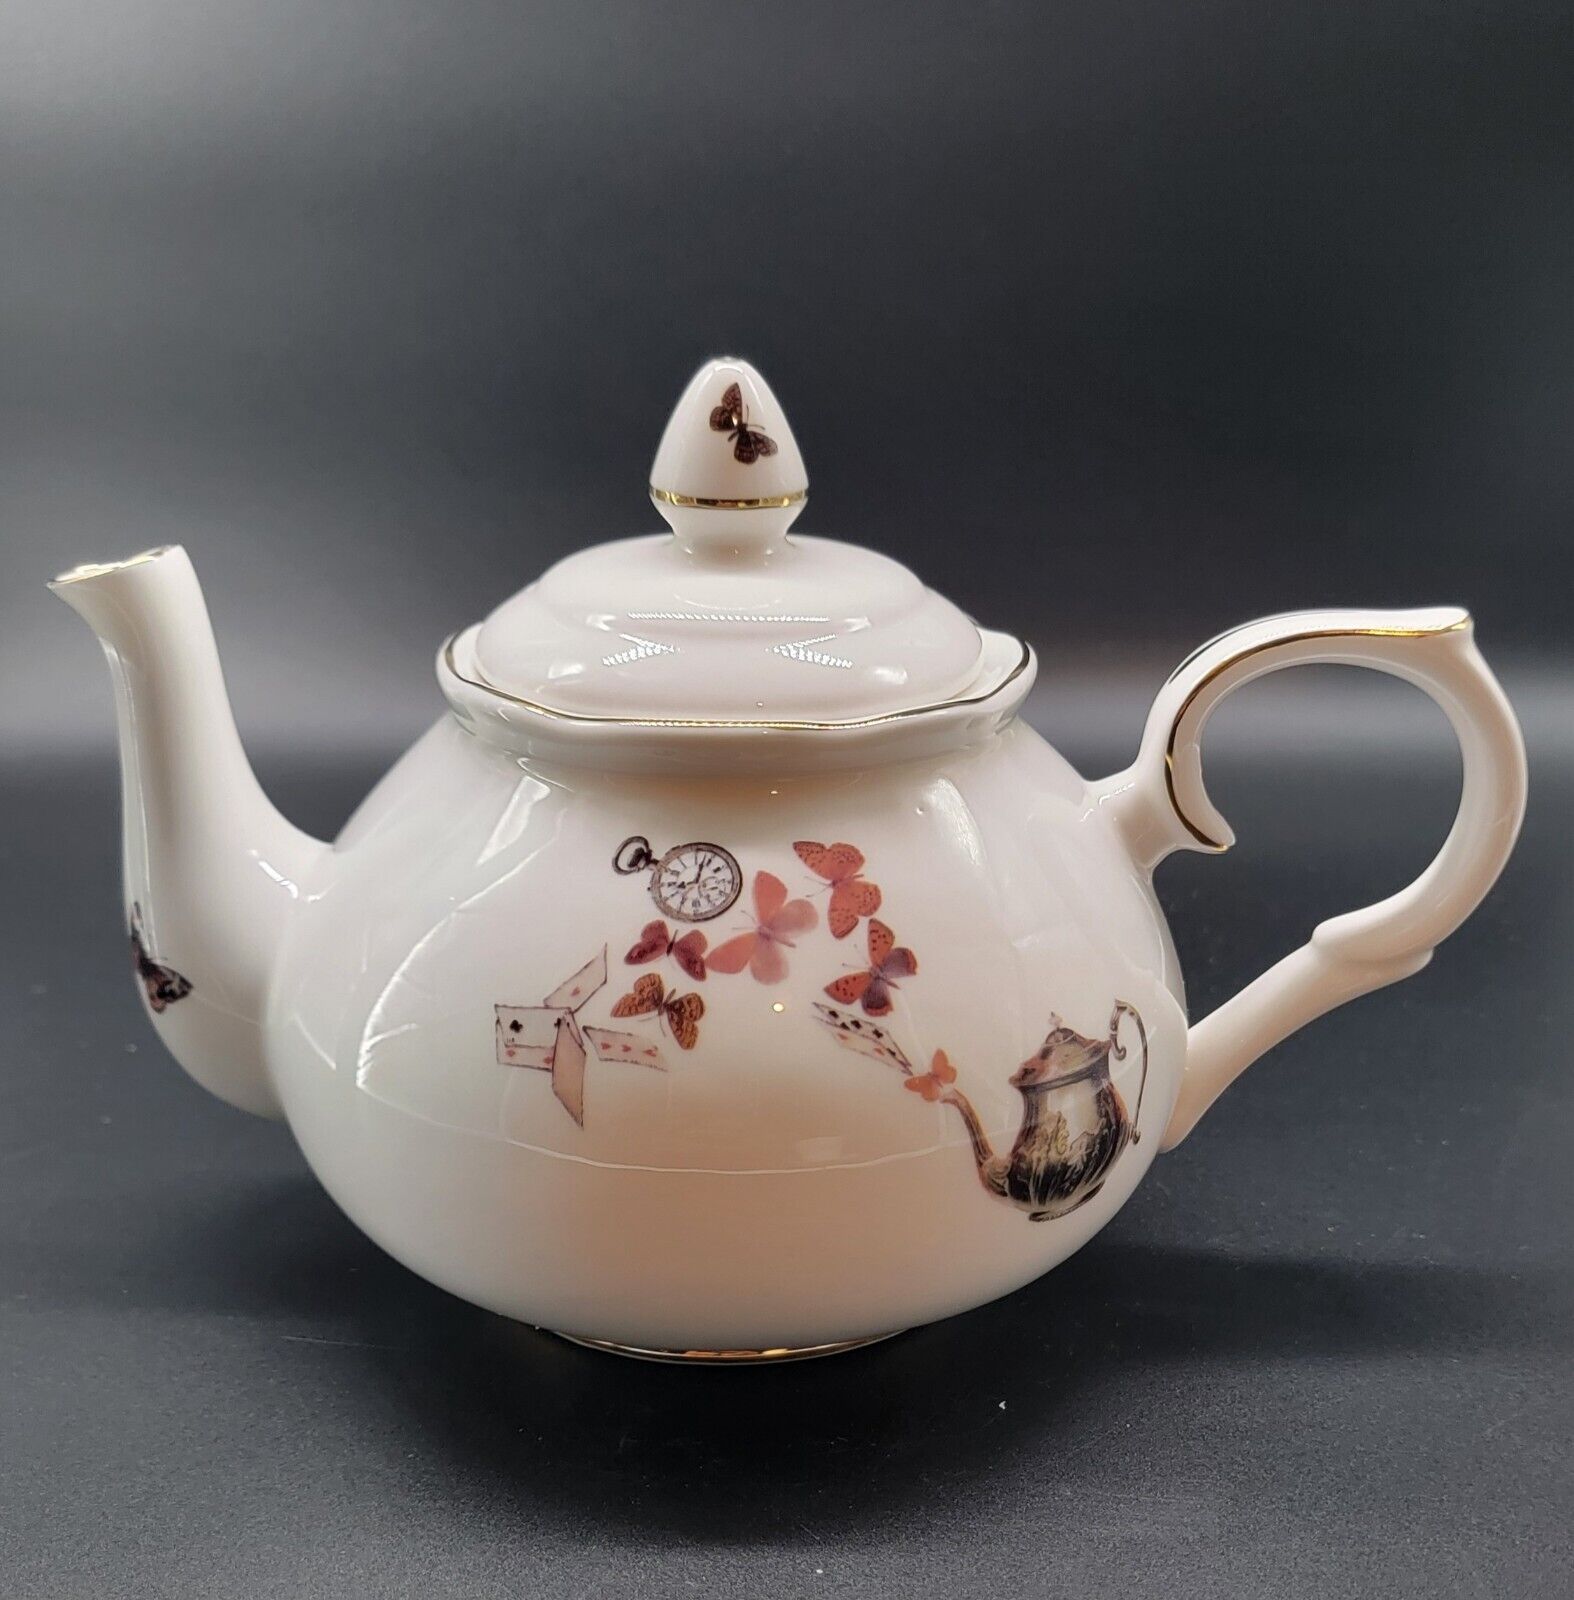  Ali Miller London - TEAPOT - from the Alice in Wonderland Collection